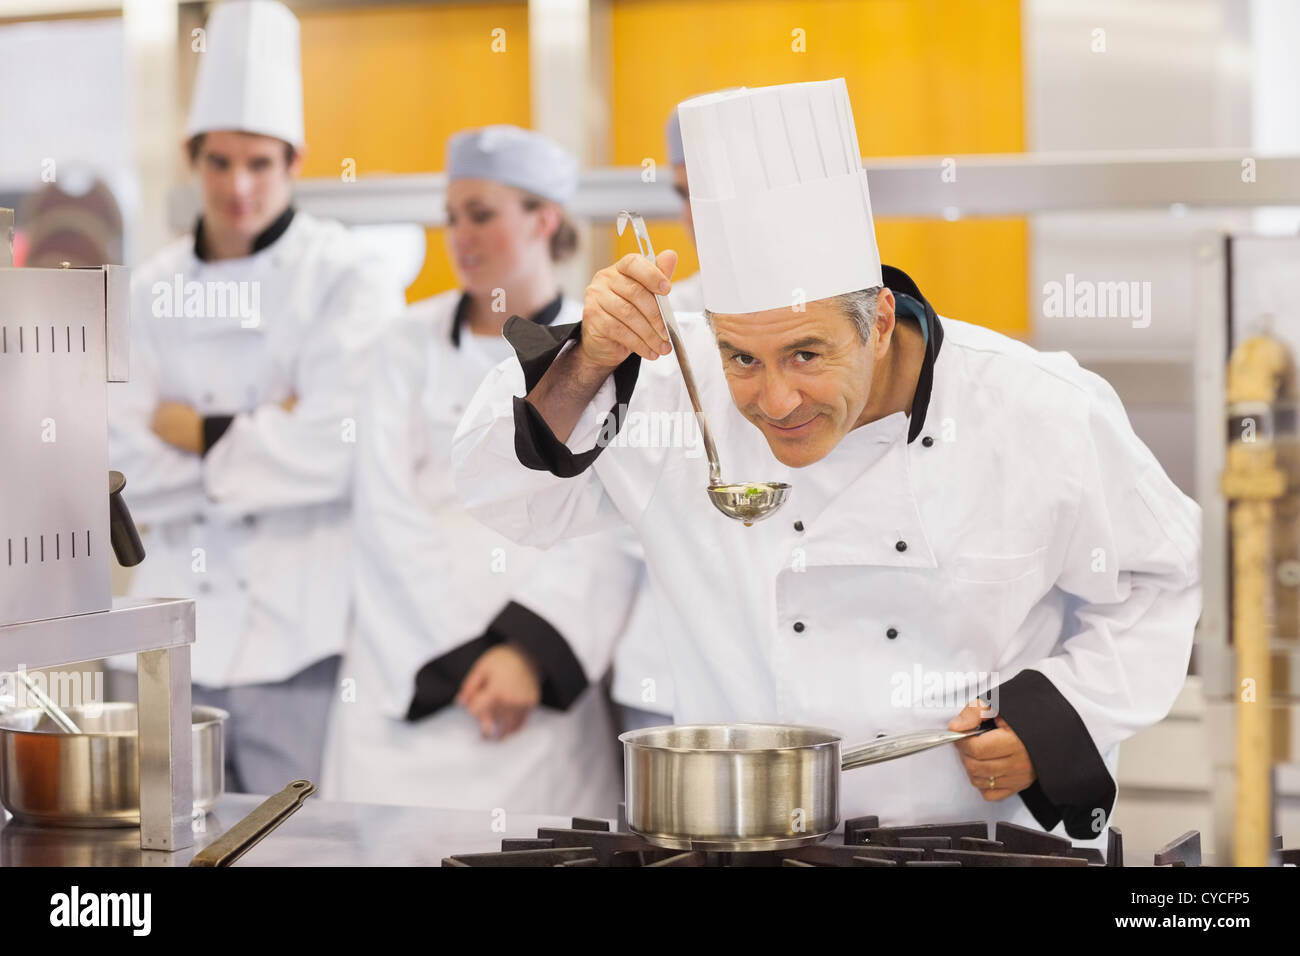 Smiling chef tasting his students work Stock Photo